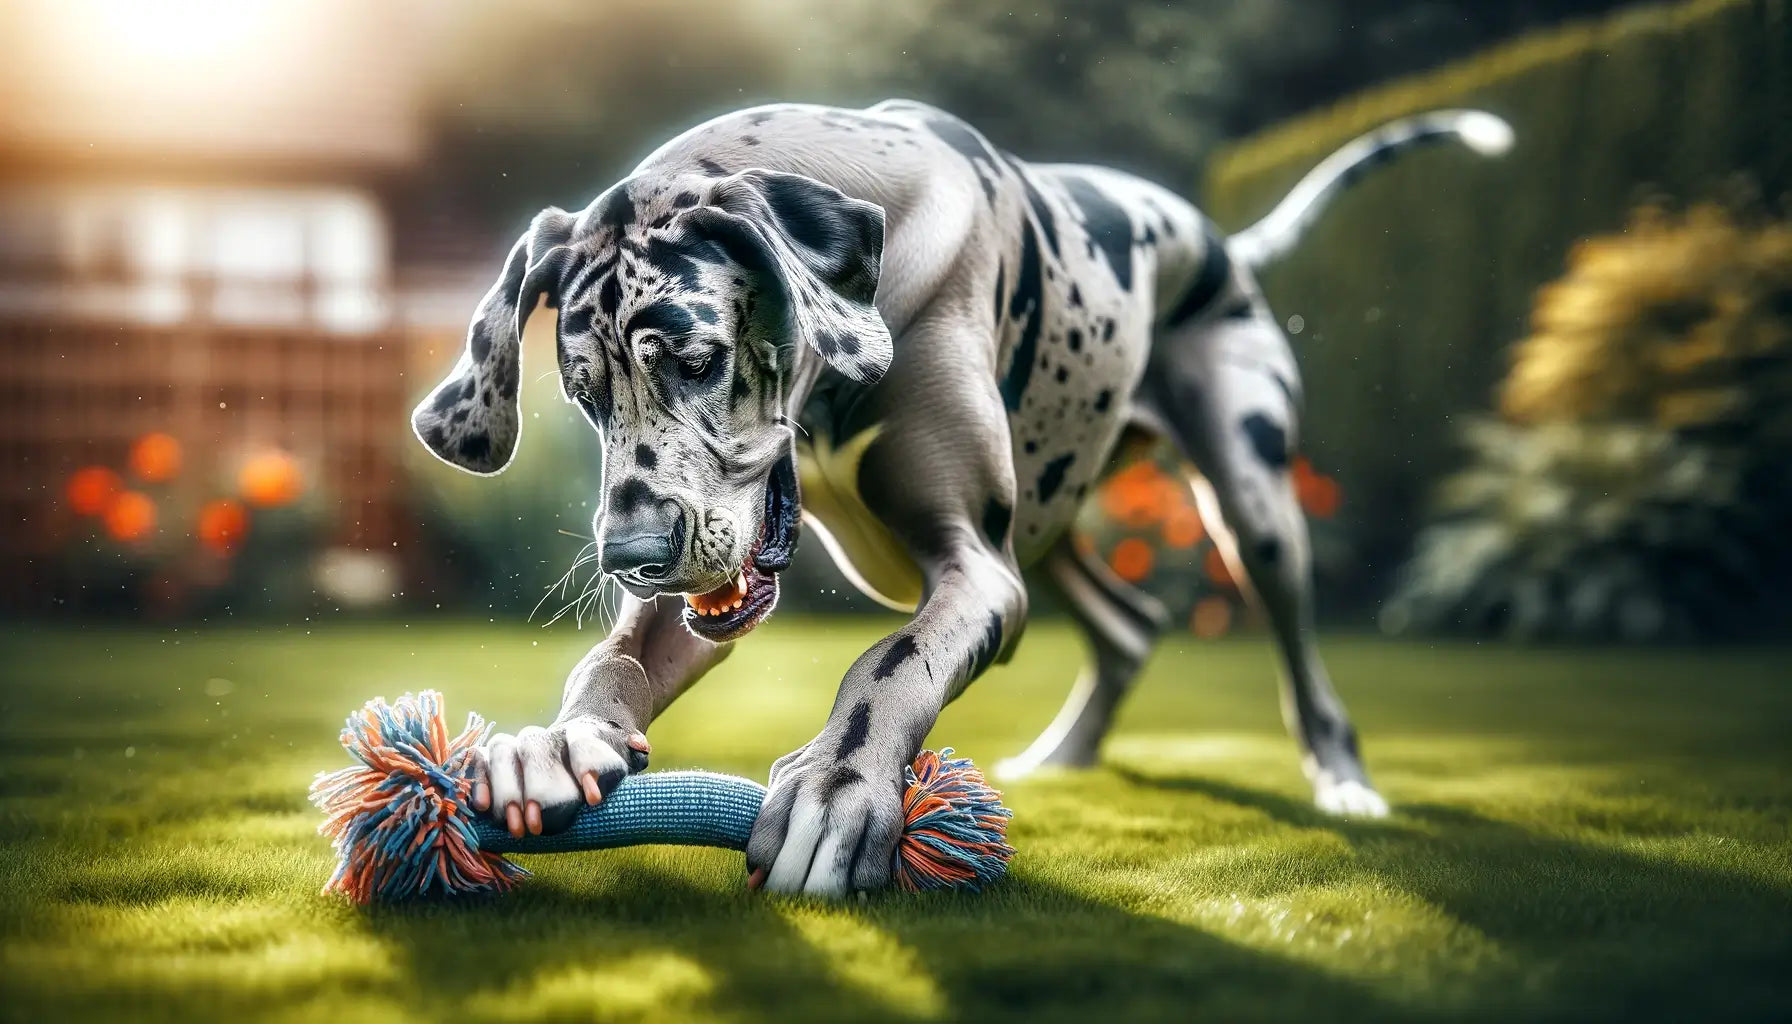 A Merle Great Dane engaging with a toy on a grassy lawn, reflecting the breed's friendly disposition and love for interaction.